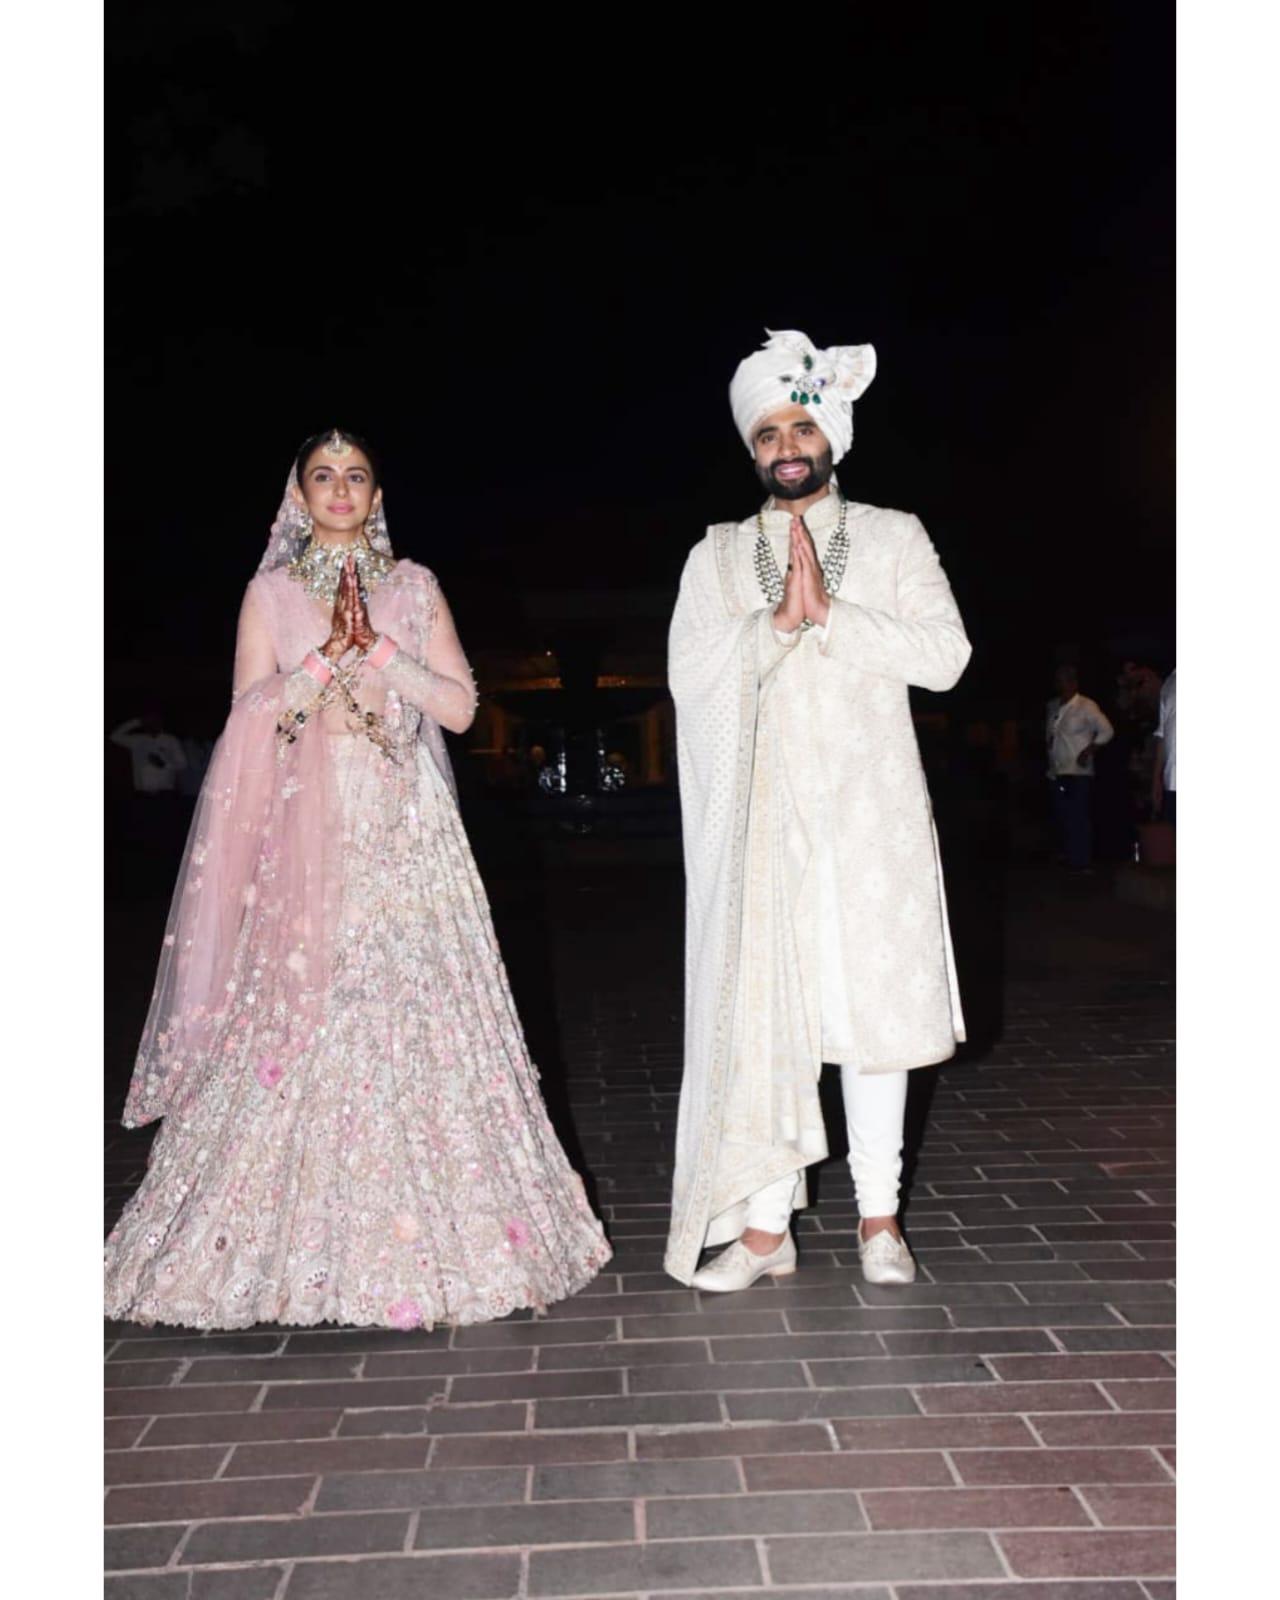 Rakul Preet Singh and Jackky Bhagnani greeted the paparazzi after the ceremony